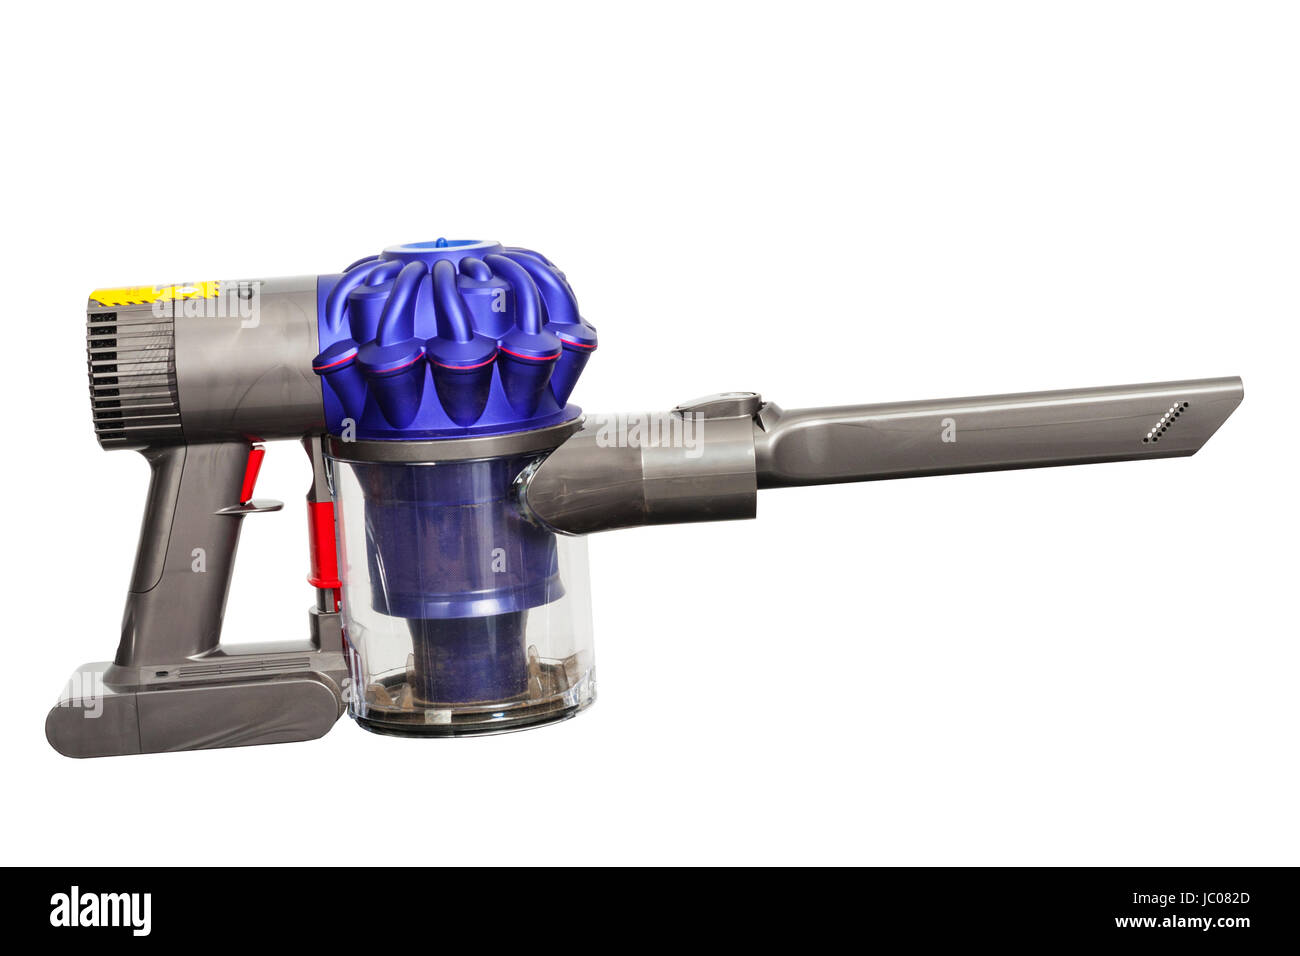 The Dyson V6 Animal cordless upright wand vacuum cleaner hoover on a white background Stock Photo